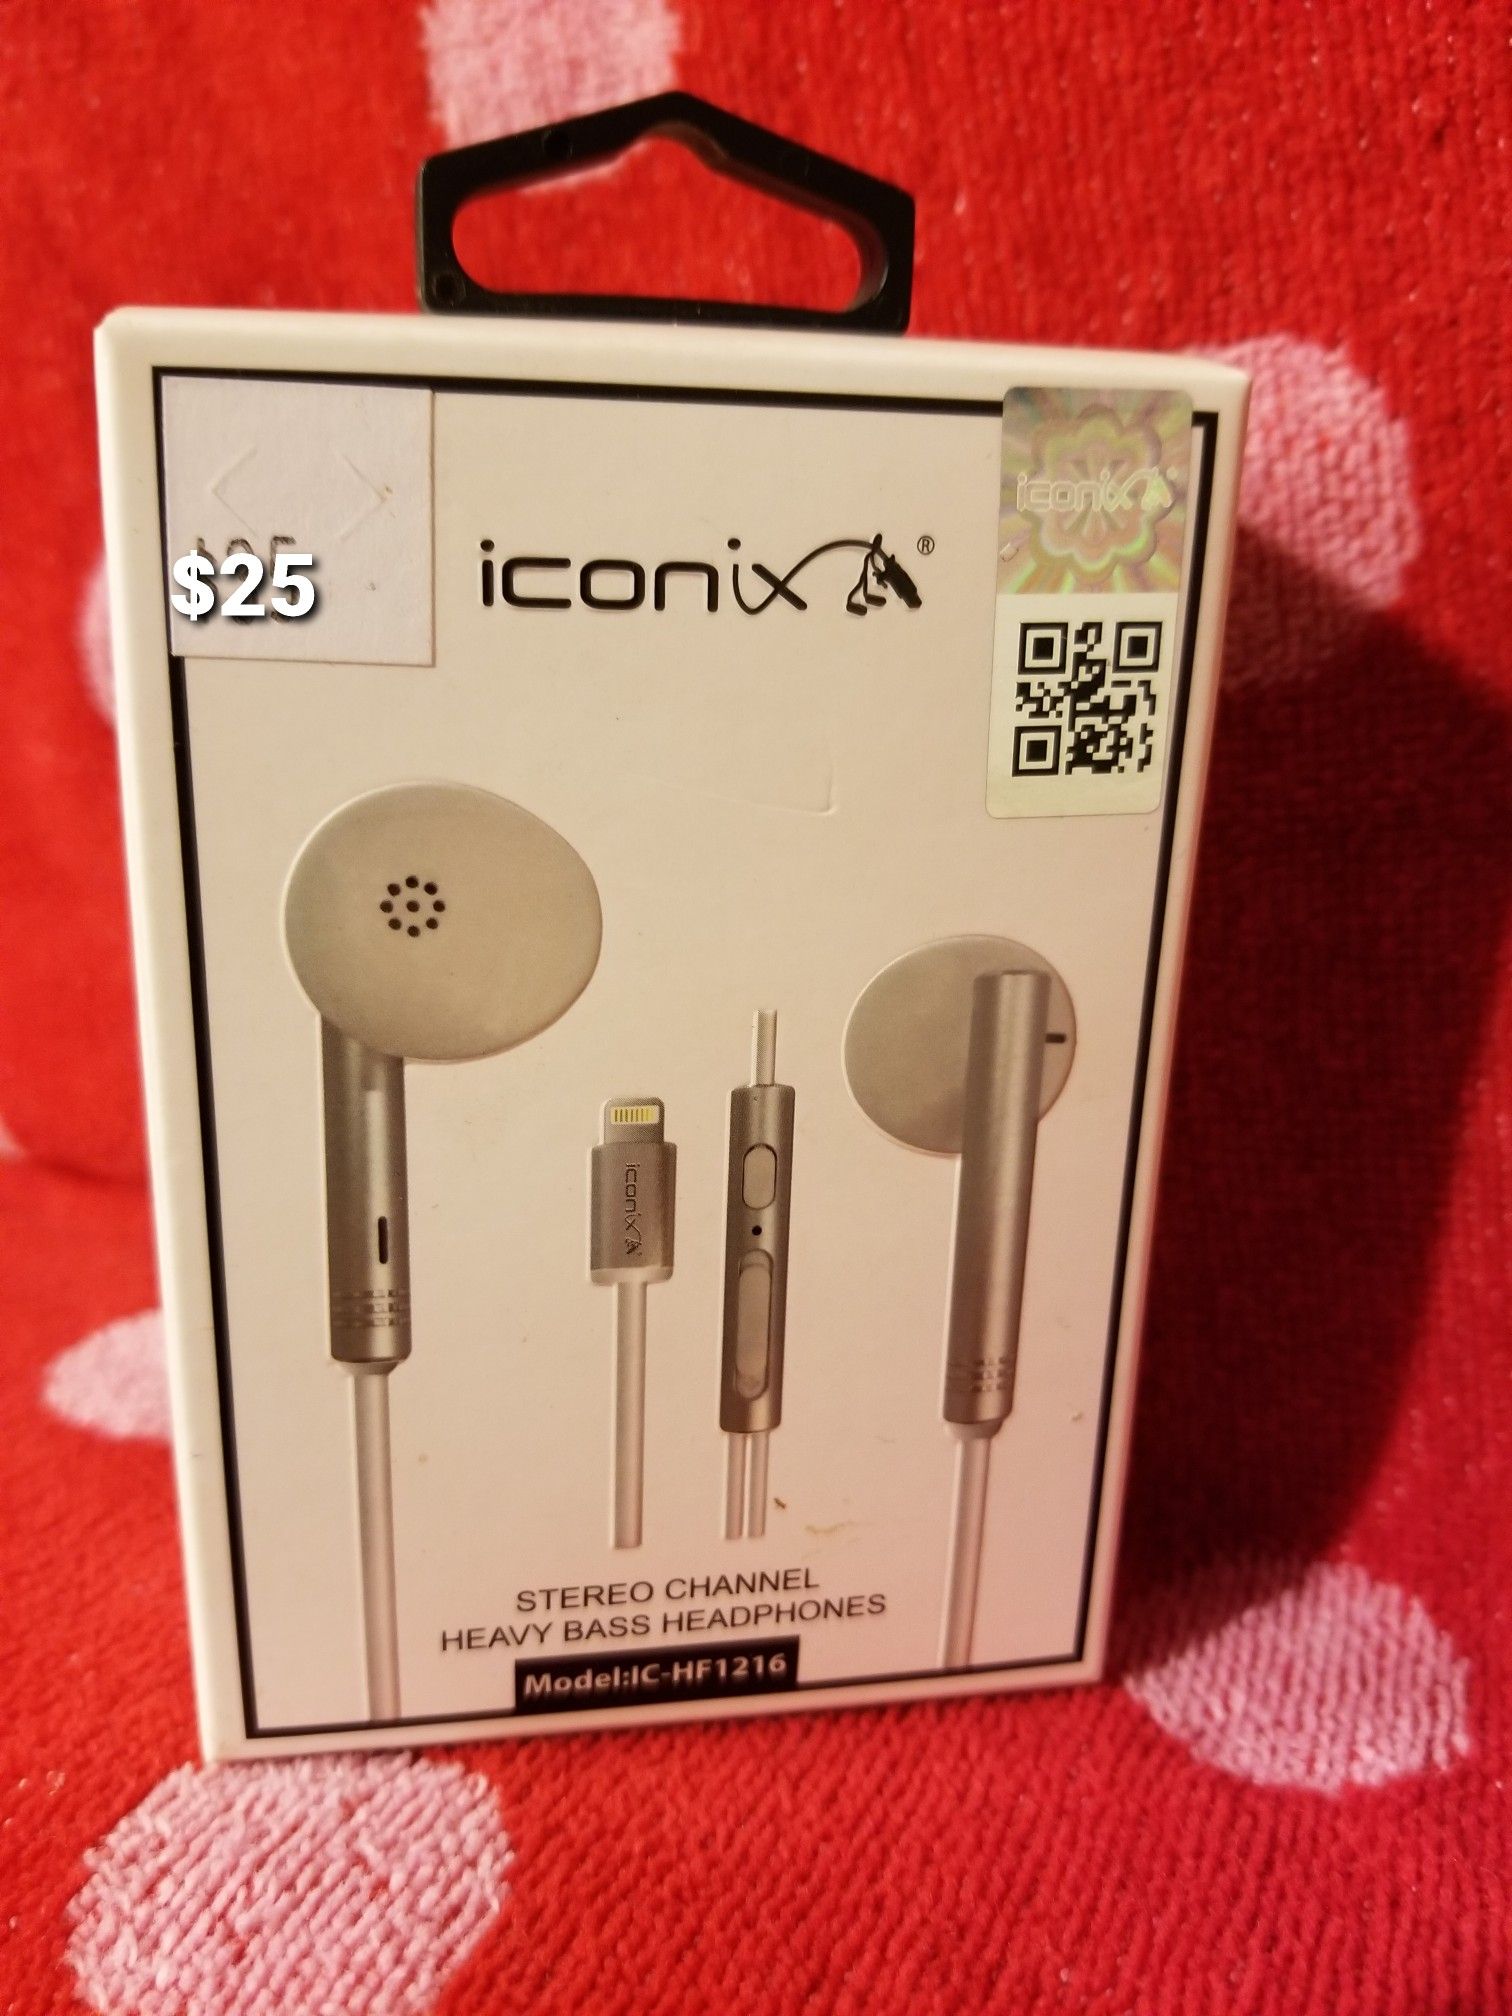 !!Skullcandy Samsung JVC Apple iPhone Aux earbuds headphones ear bud many different types of Earbuds available Bz1